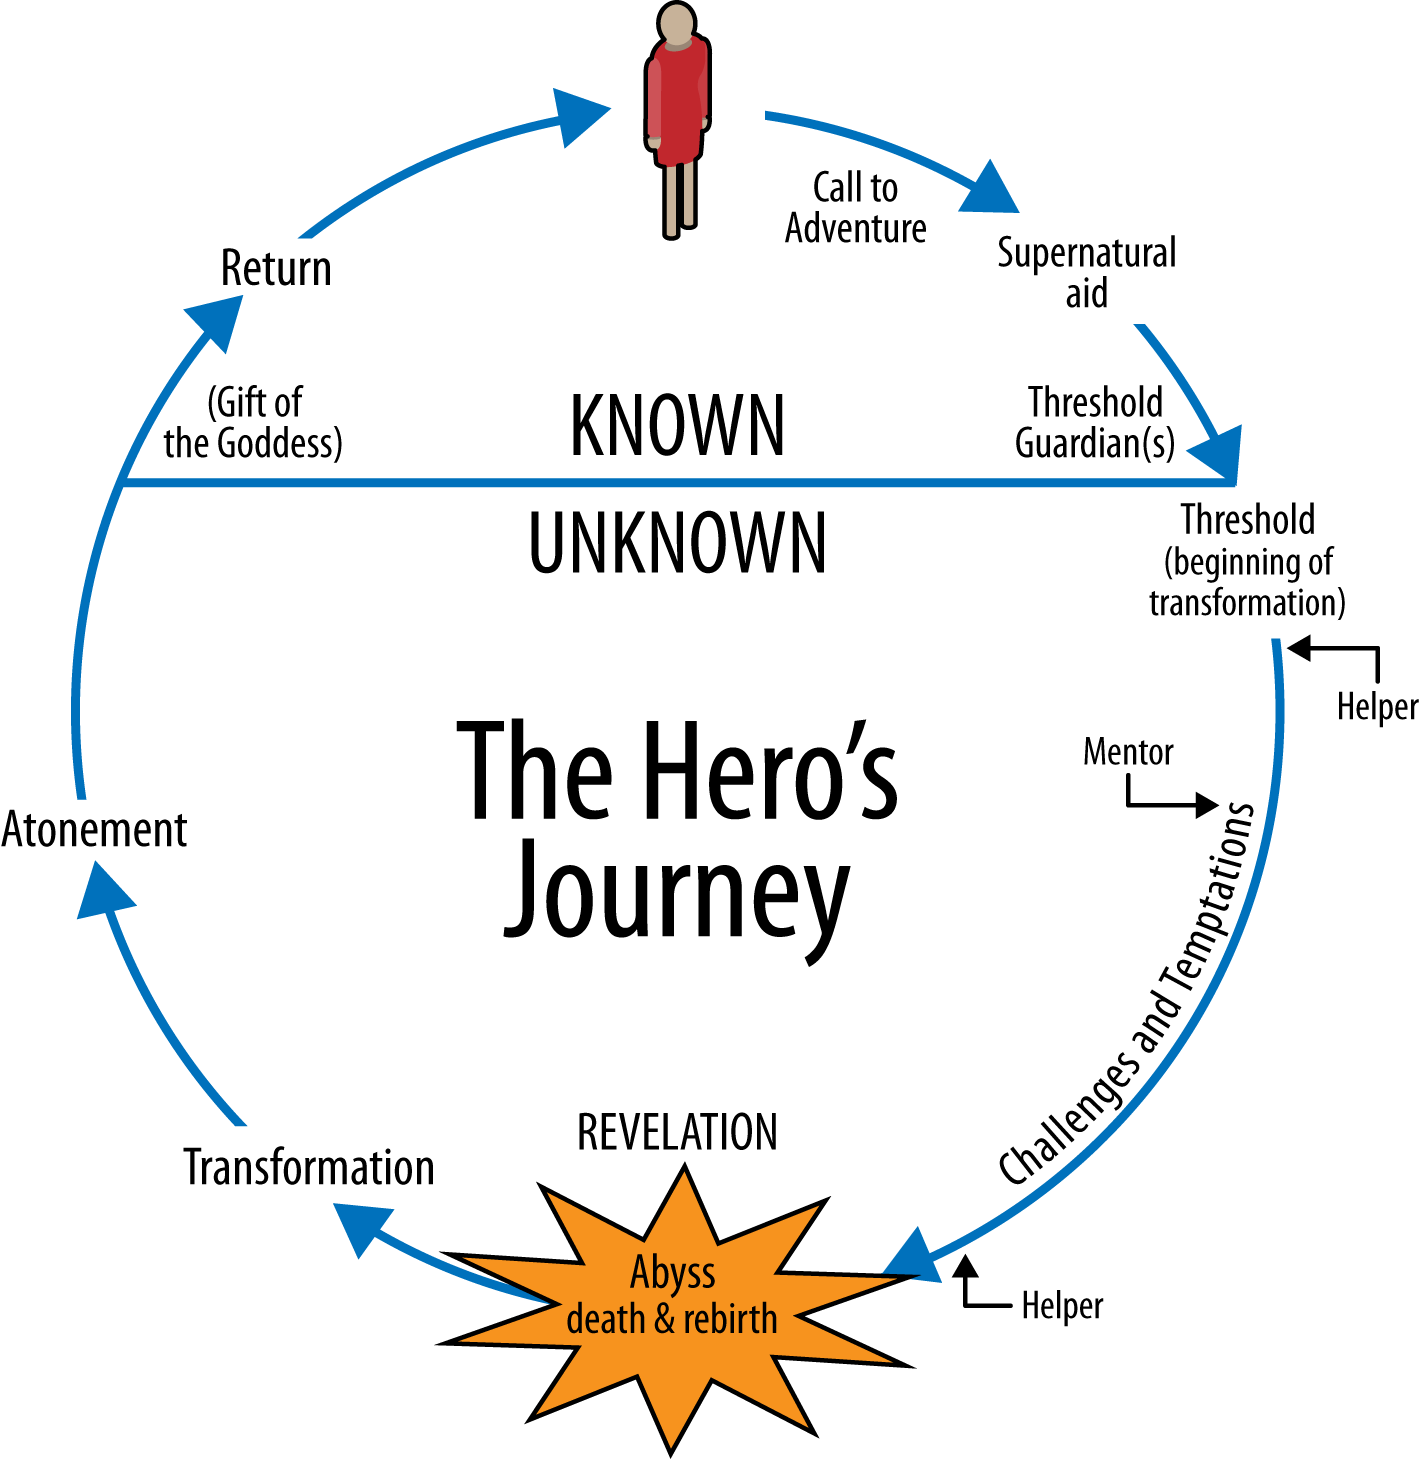 The cycle of the hero's journey